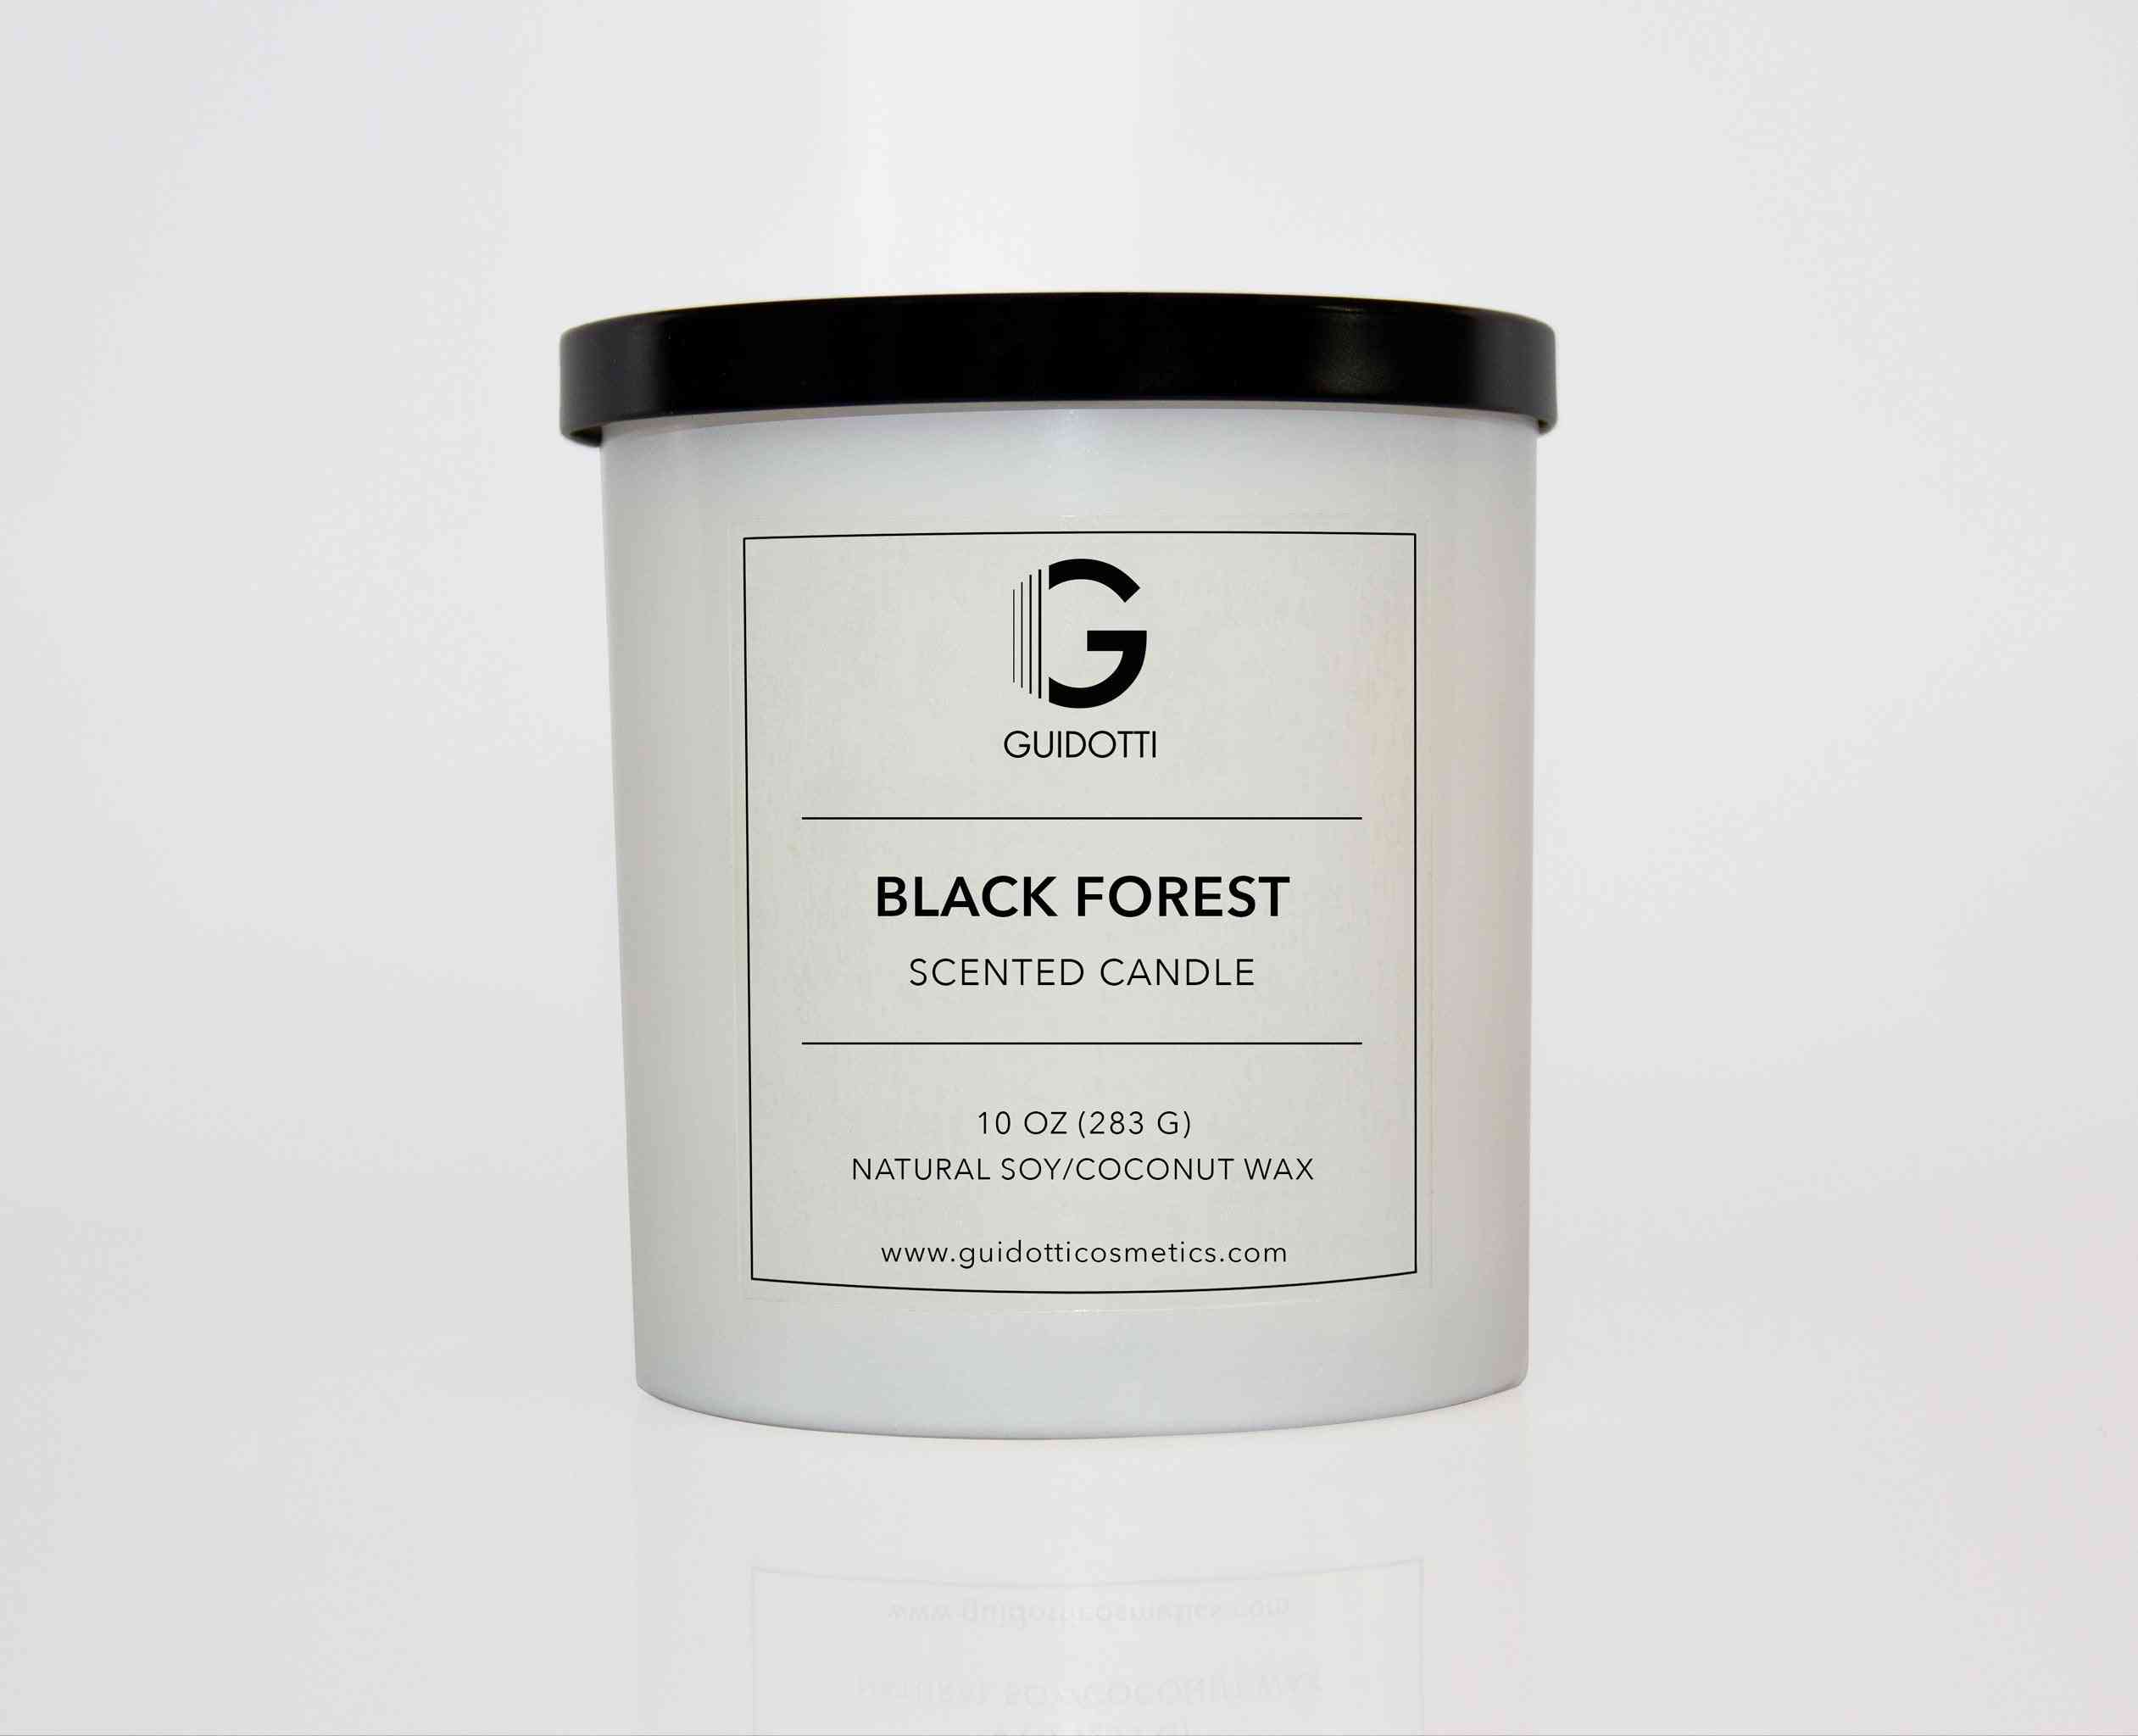 Black Forest Scented Soy Candle